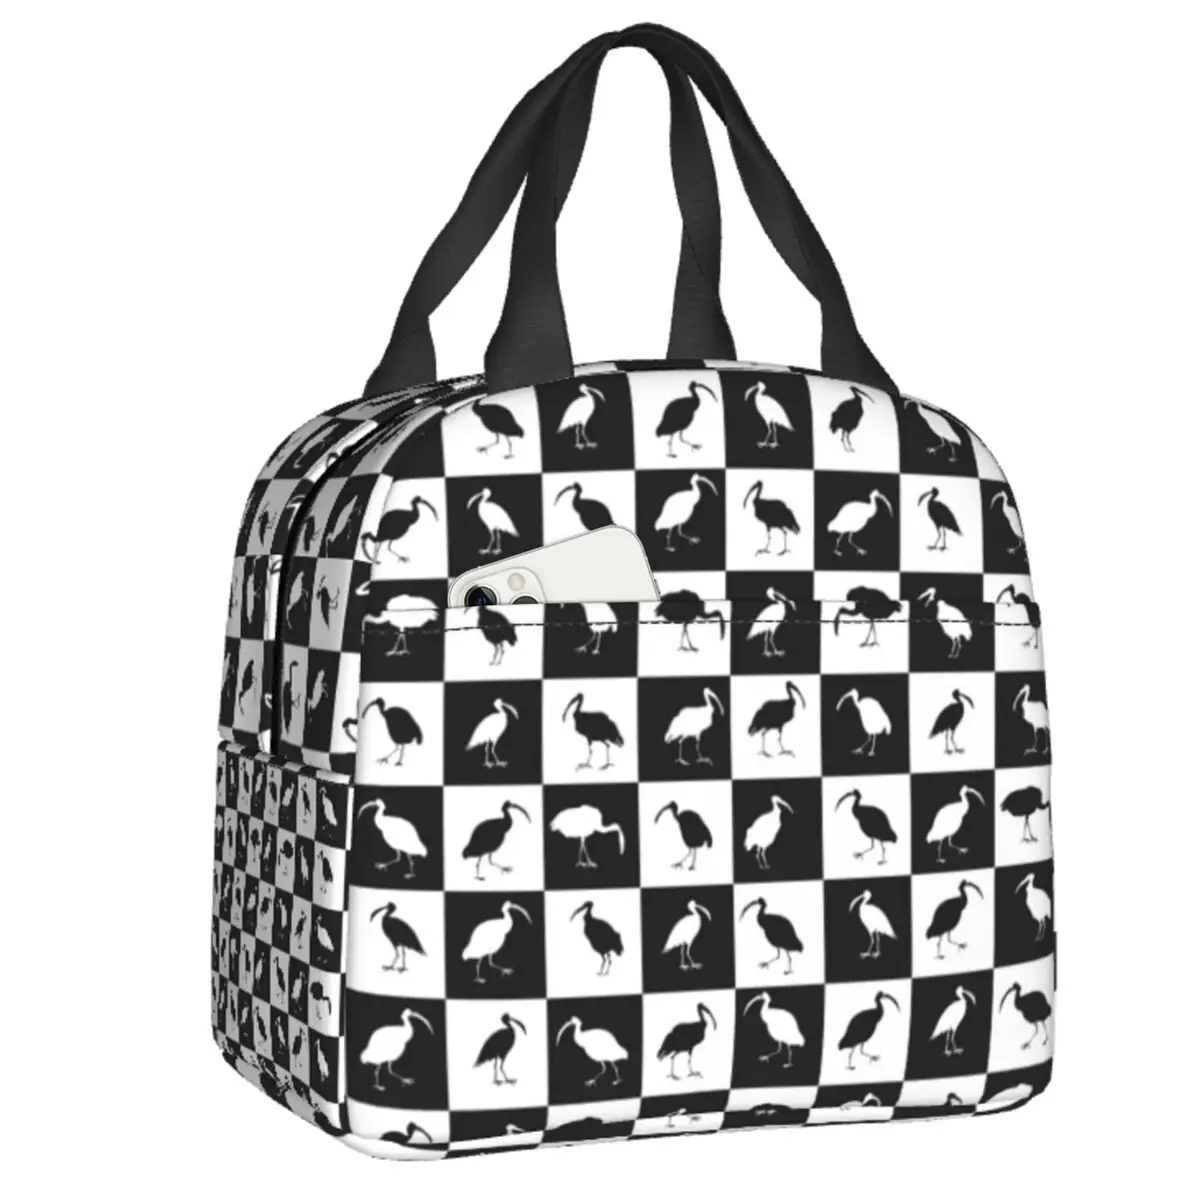 

Checkerboard Pattern Insulated Lunch Bags for Women Checkered Portable Thermal Cooler Bento Box Outdoor Camping Travel